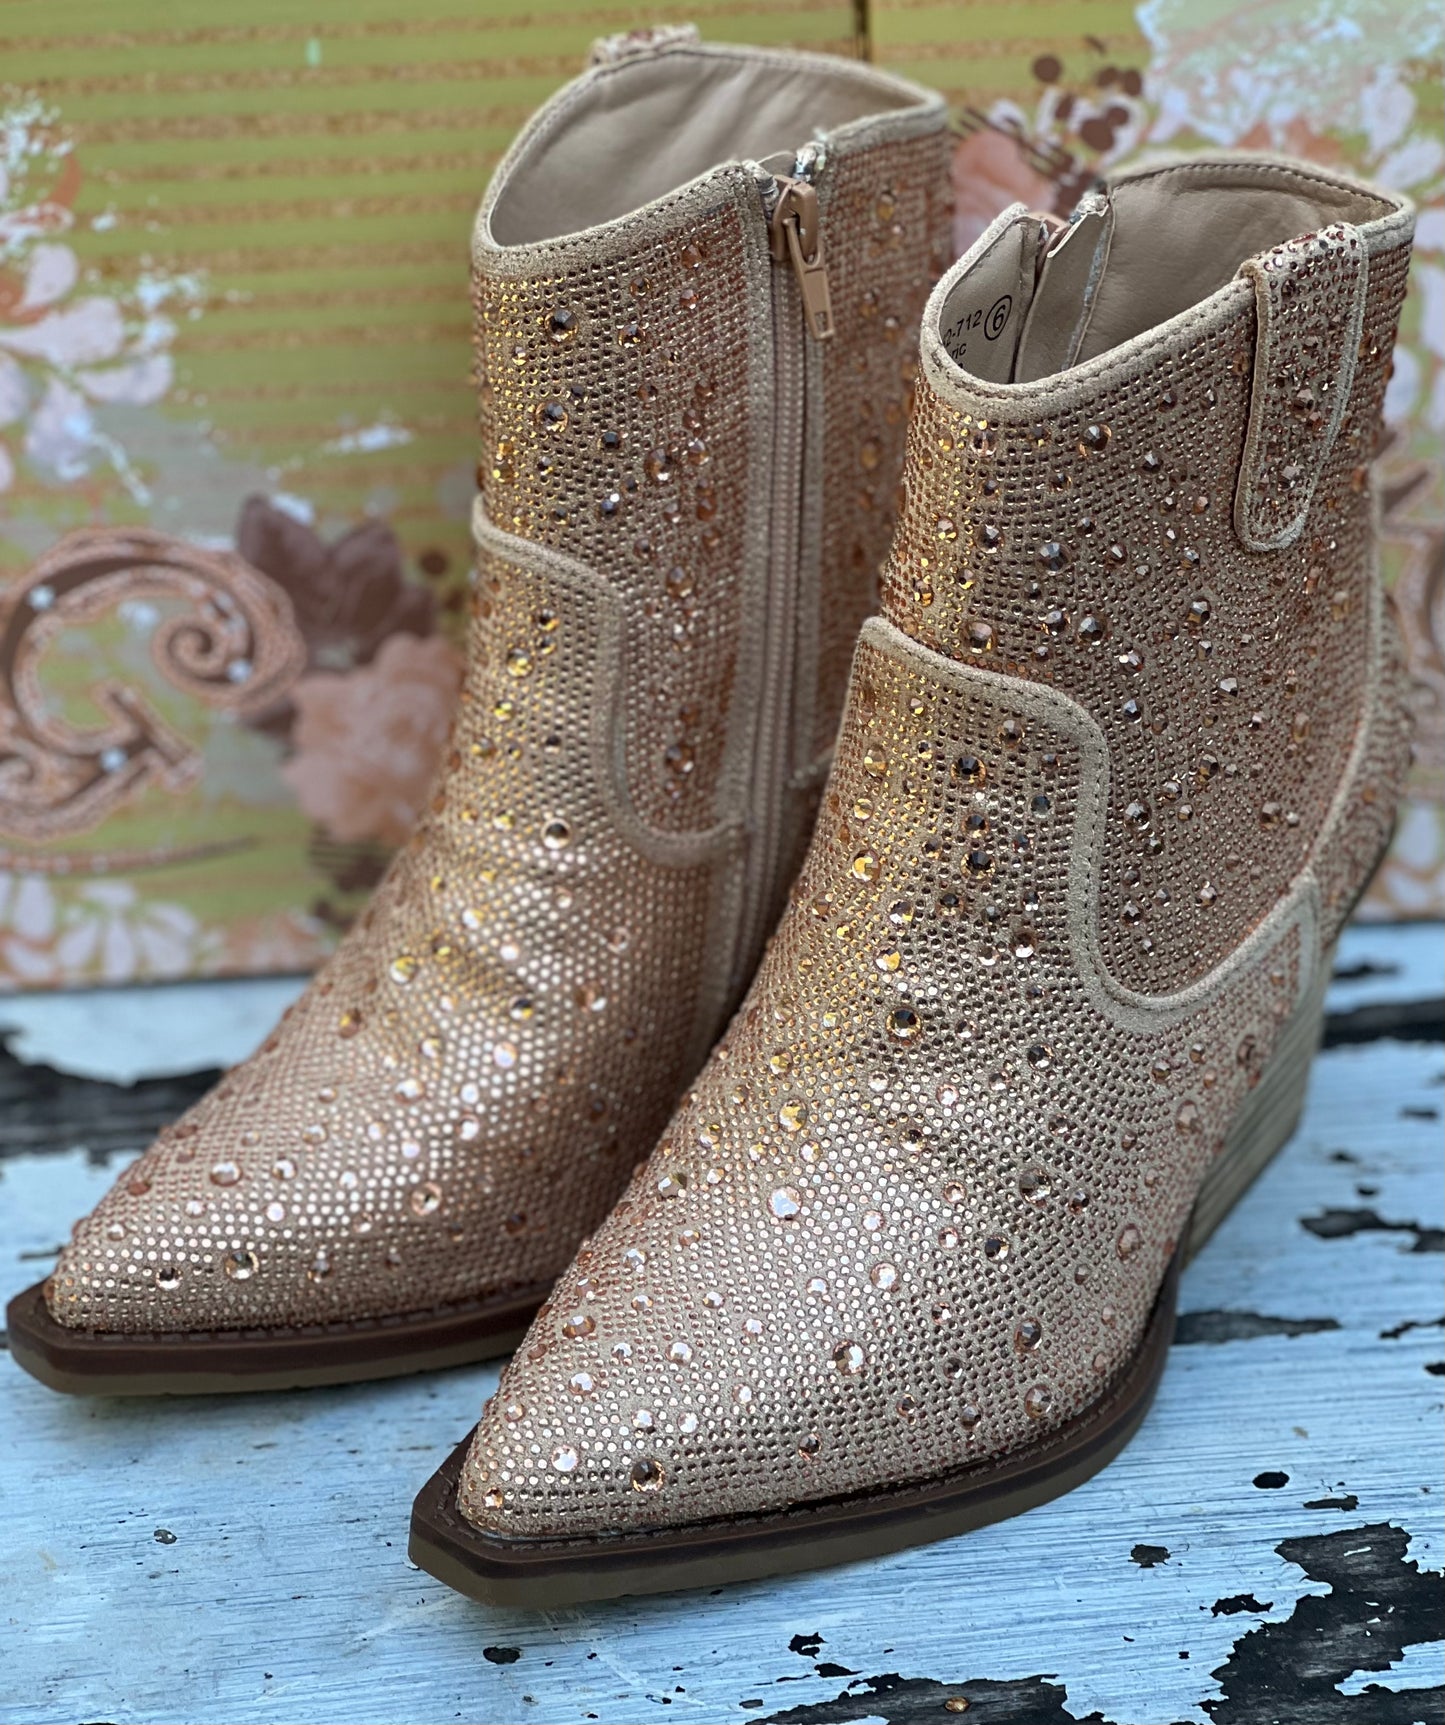 Very G rose gold “Kady” bling boots